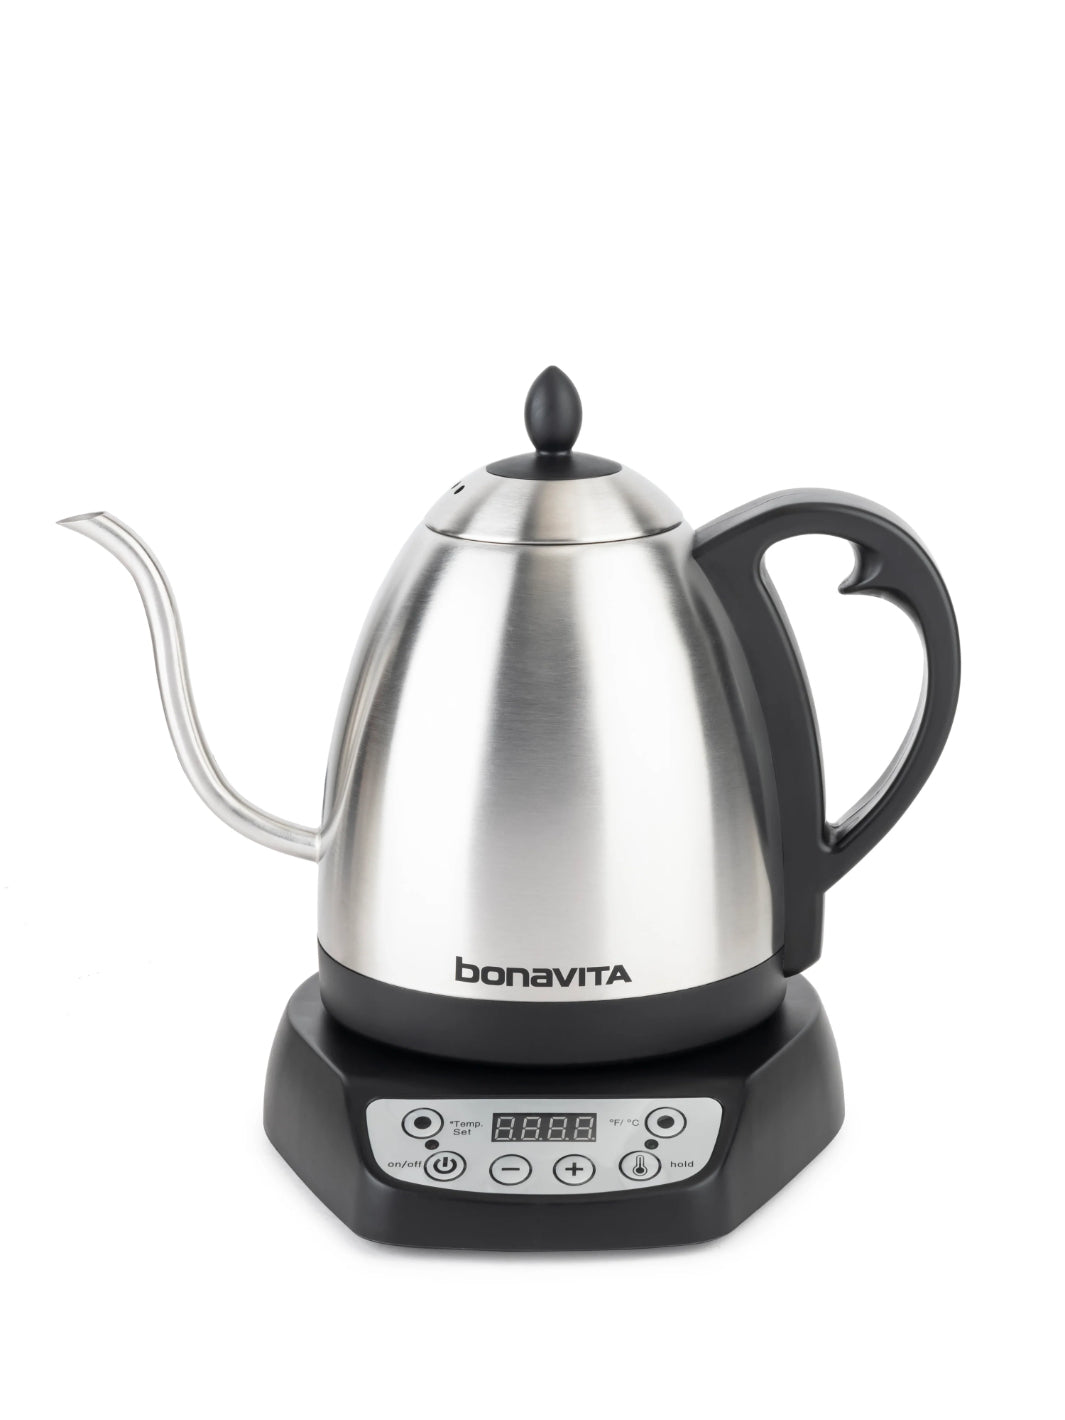 Electric kettle with temperature buttons that also start the boil : r/tea